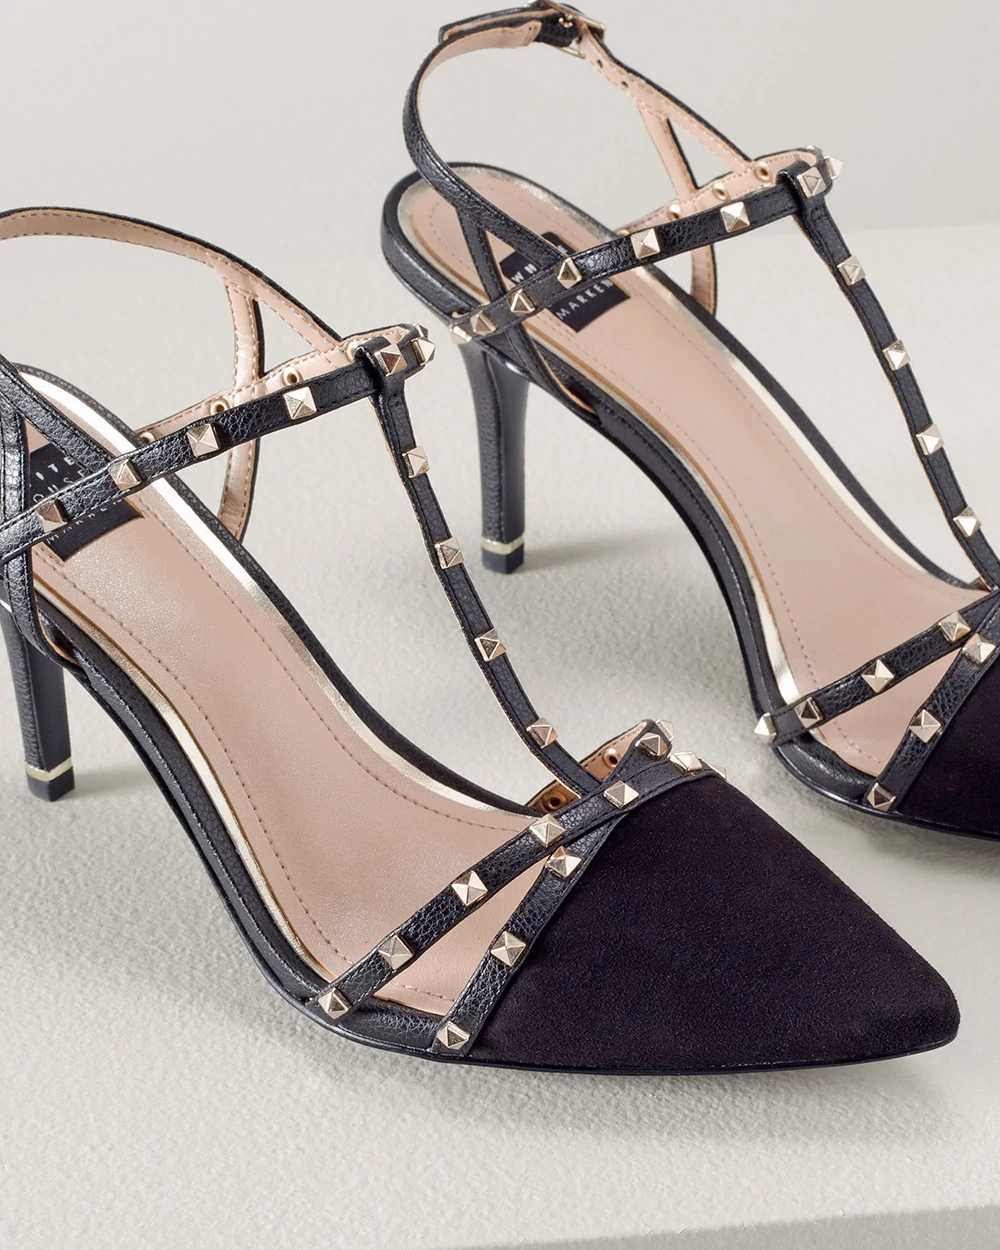 Strappy Studded Mid-Heel Pump click to view larger image.